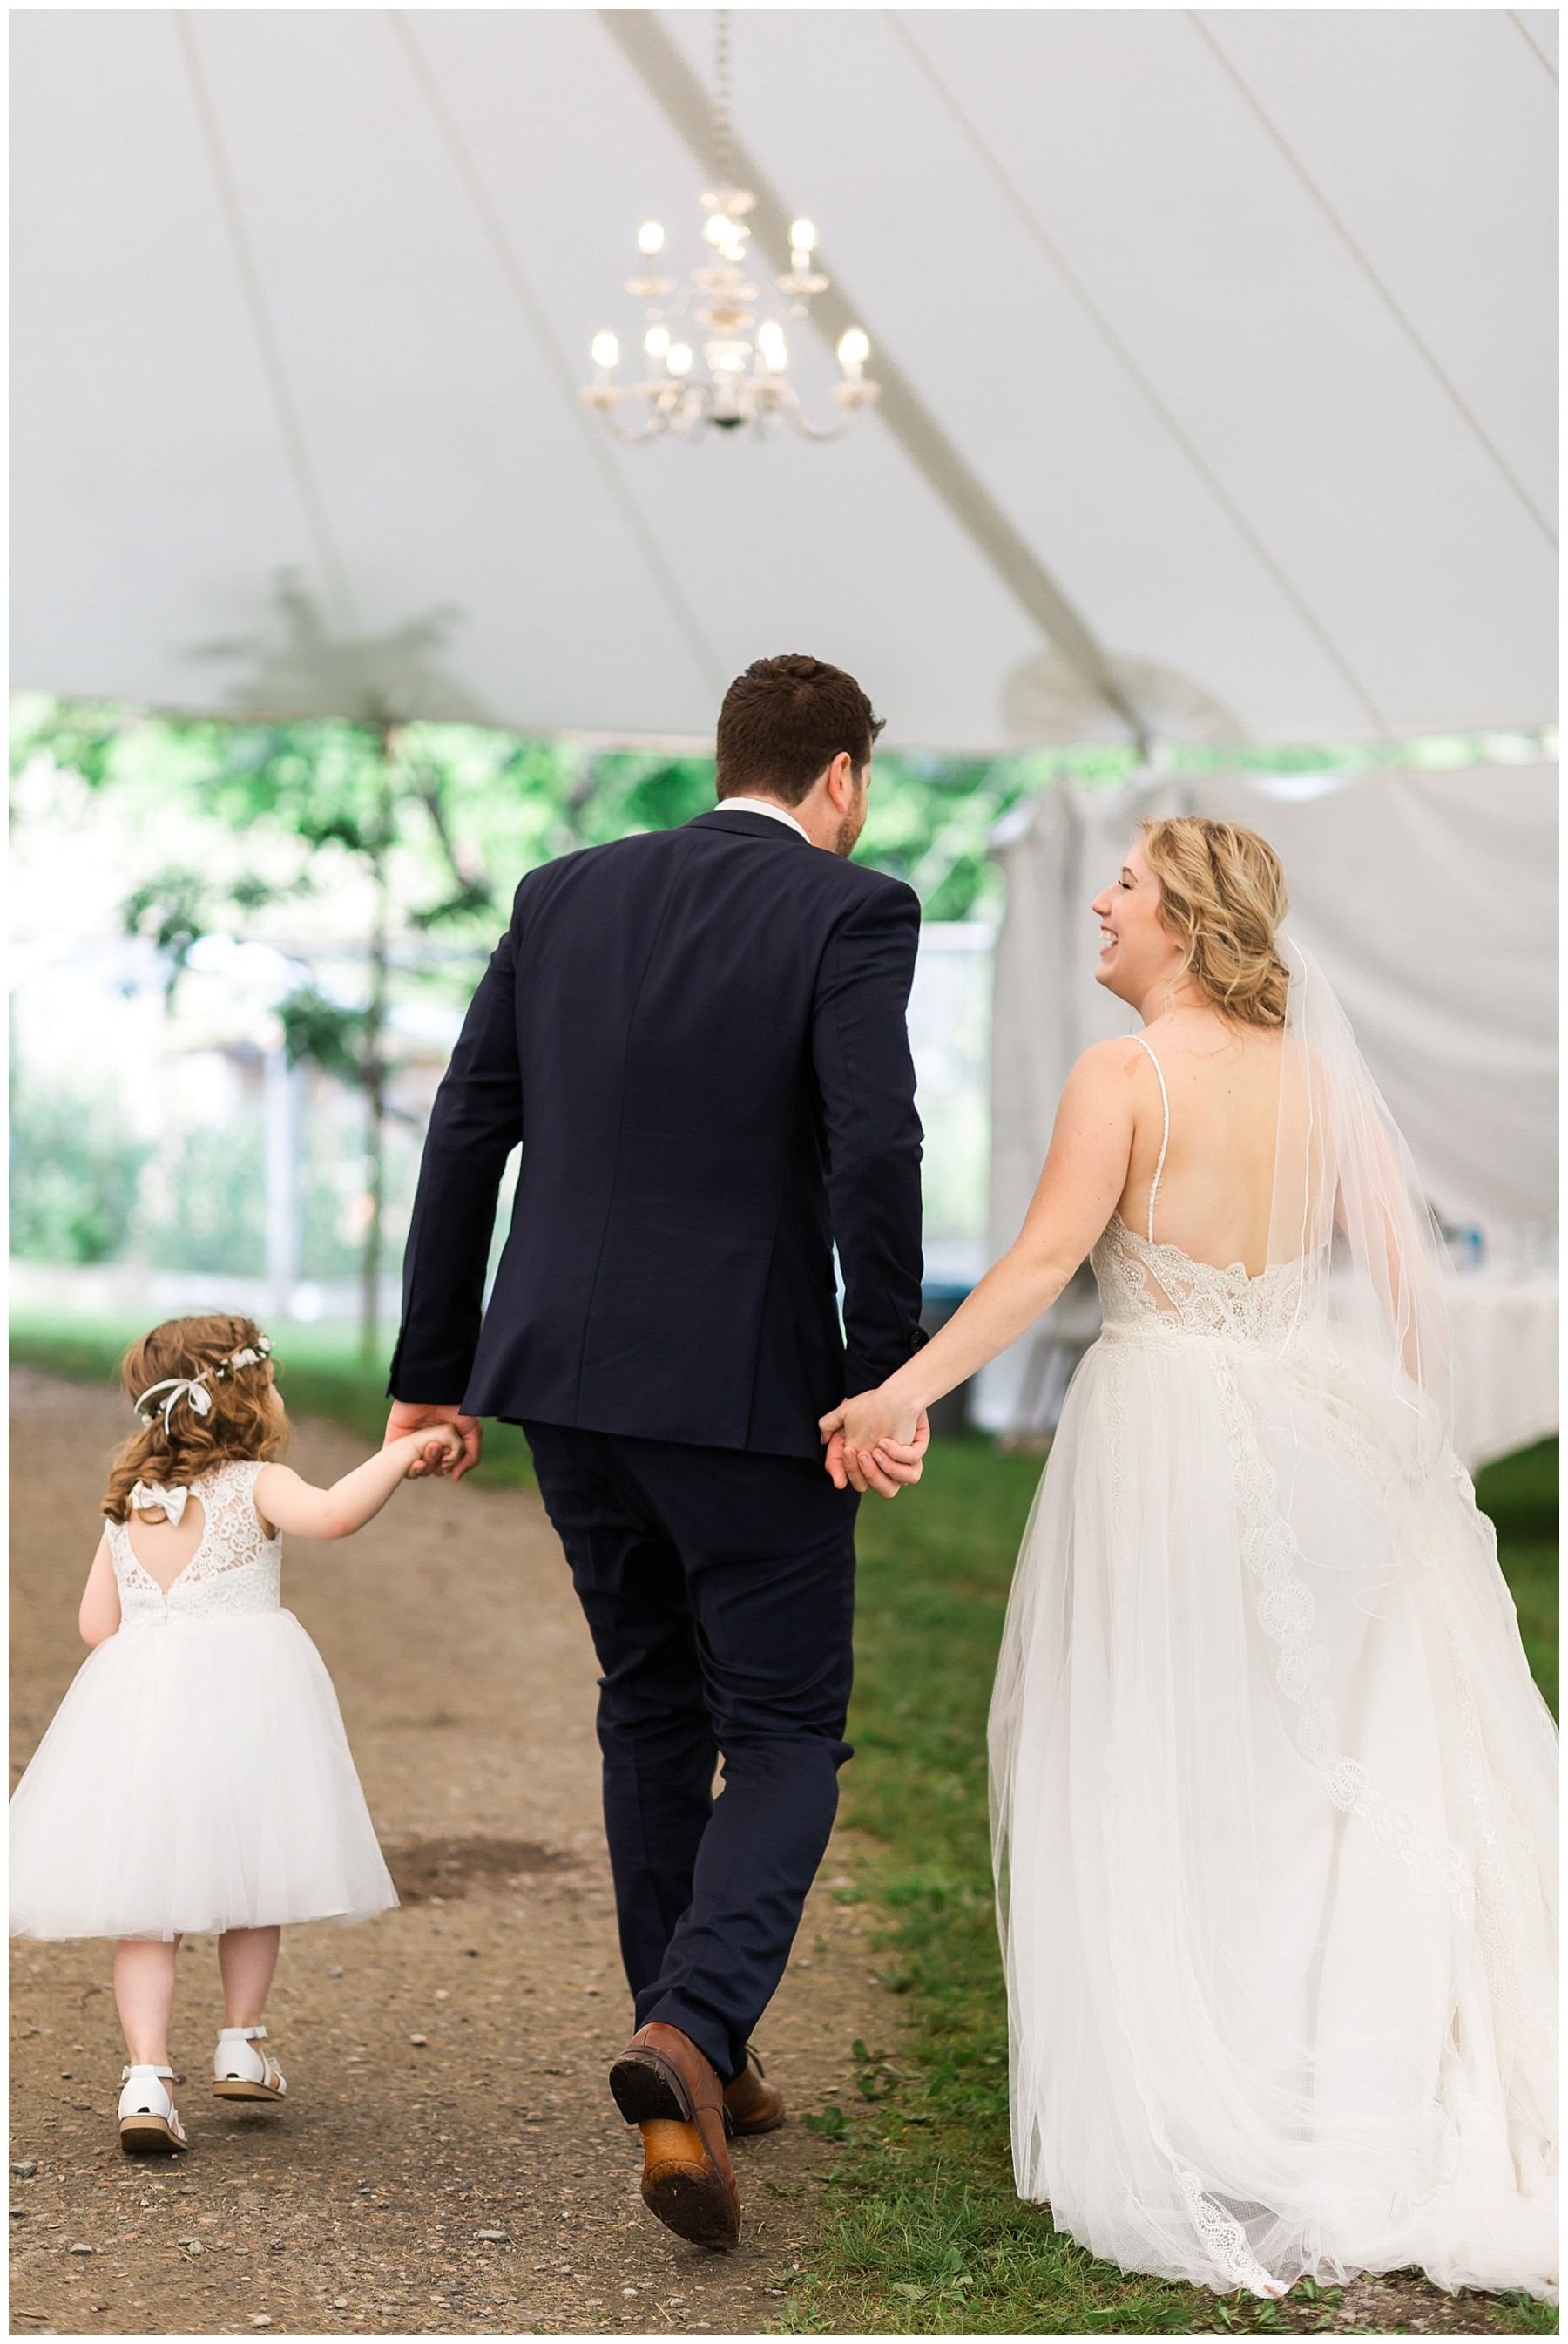 Bride and groom and flower girl walking hand in hand